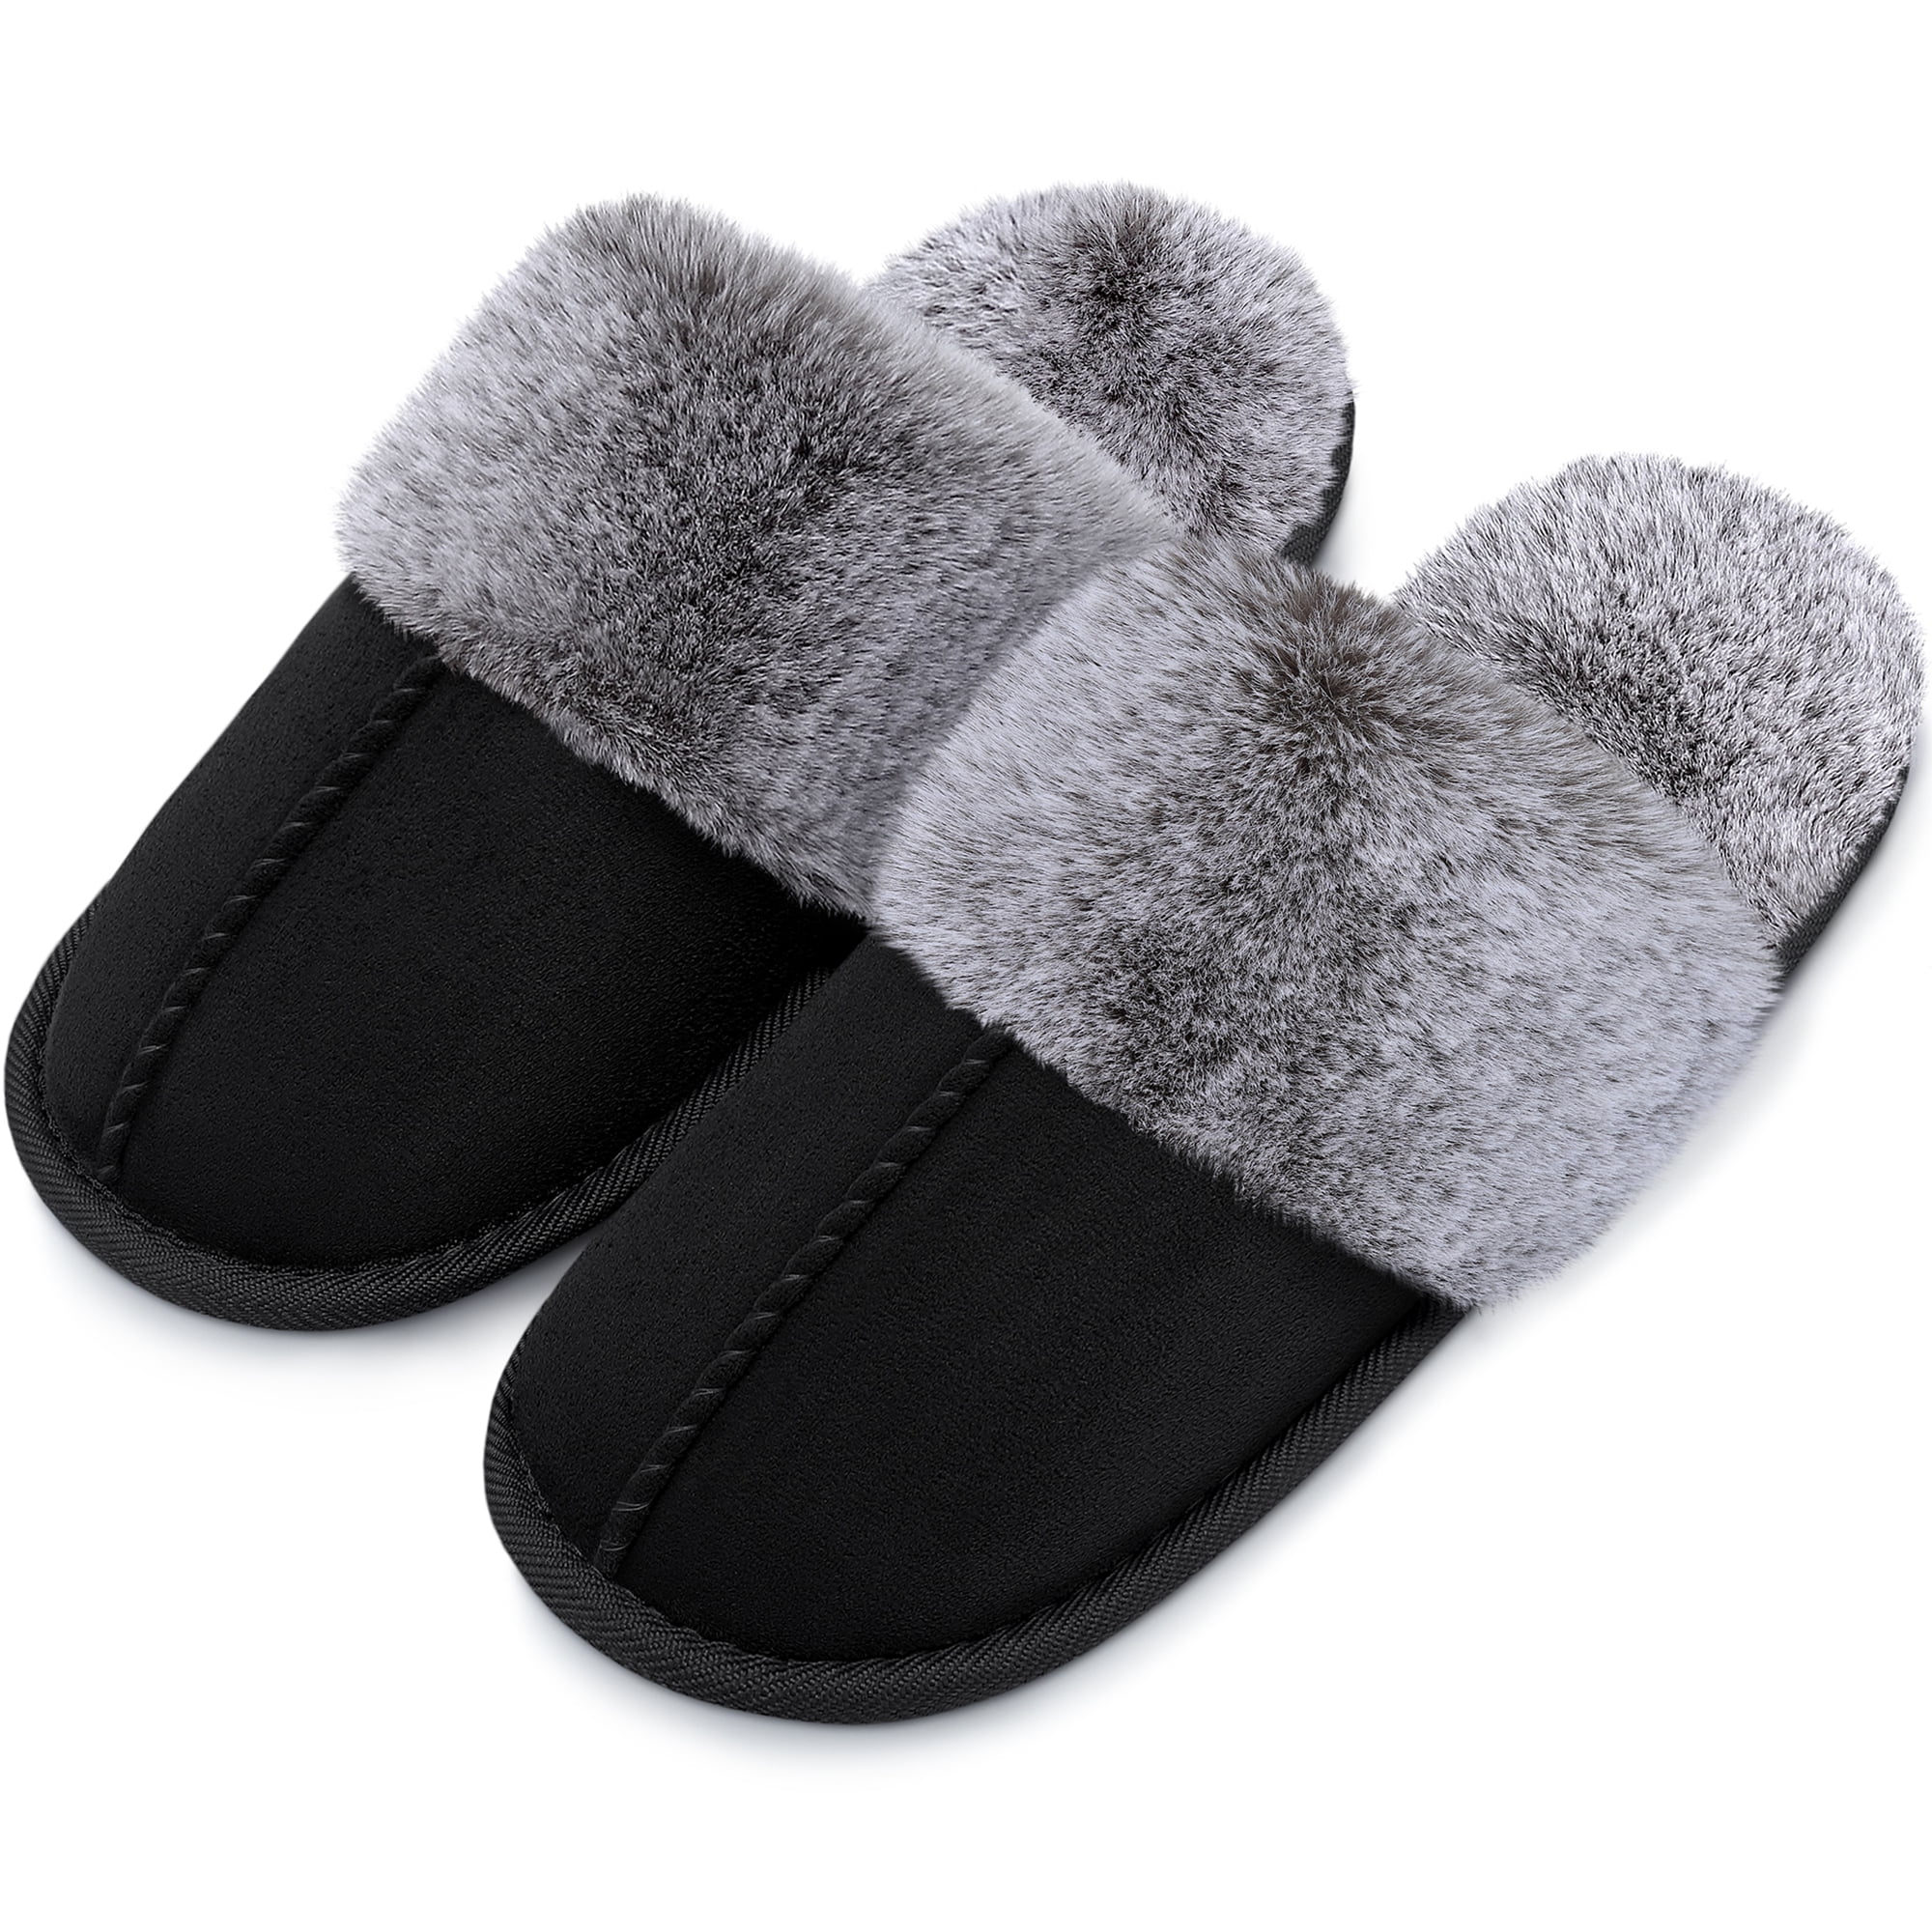 Bergman Kelly Women's Fuzzy Faux Fur Slide Slippers, Starlet Collection - Scuff Style (US Company), Size: 9-10, Pink